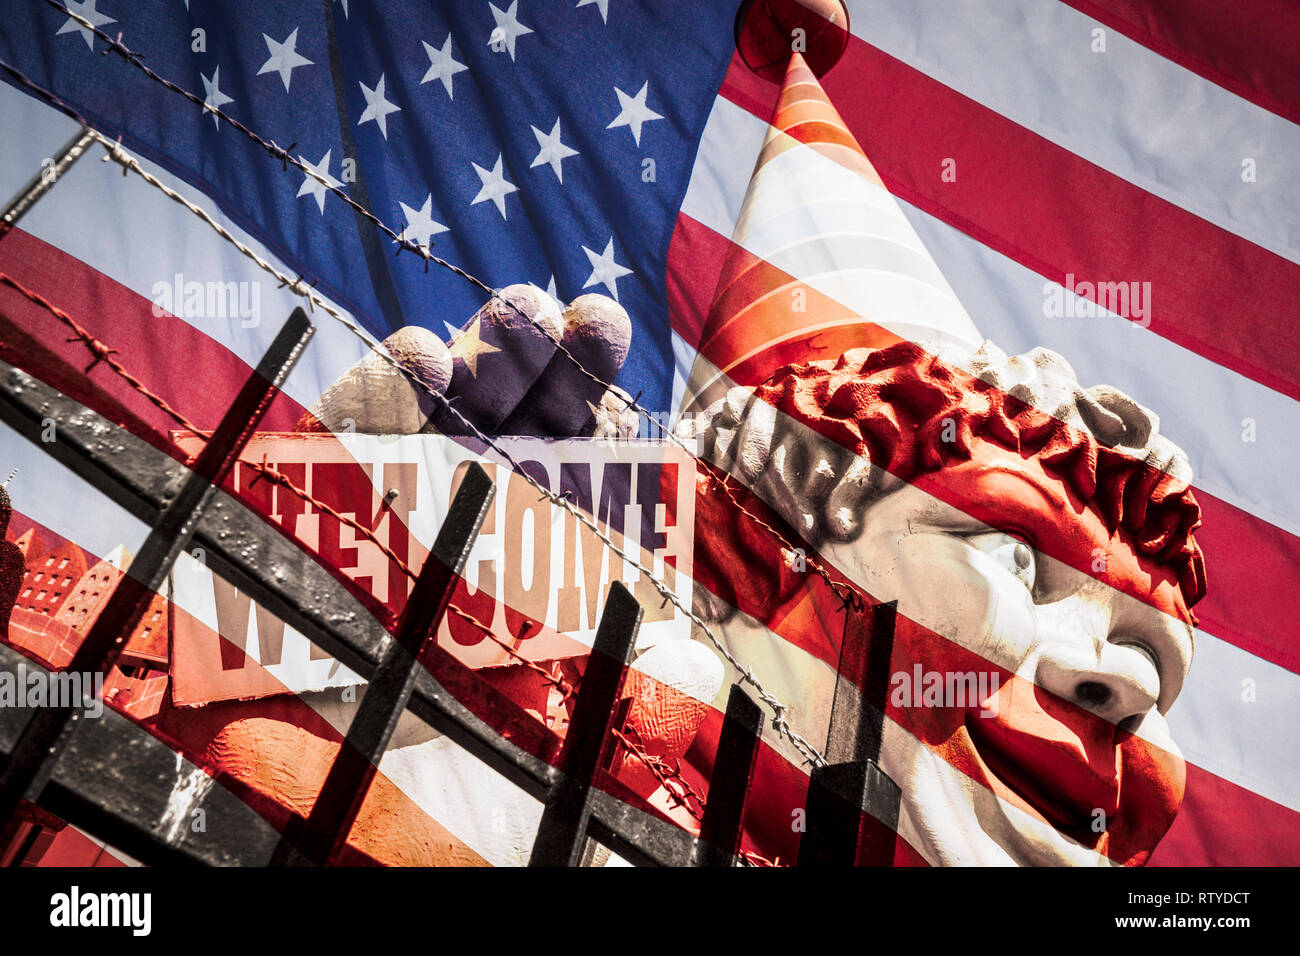 Clown holding welcome sign behind razor wire fence: USA, United States of America immigration concept image. Stock Photo